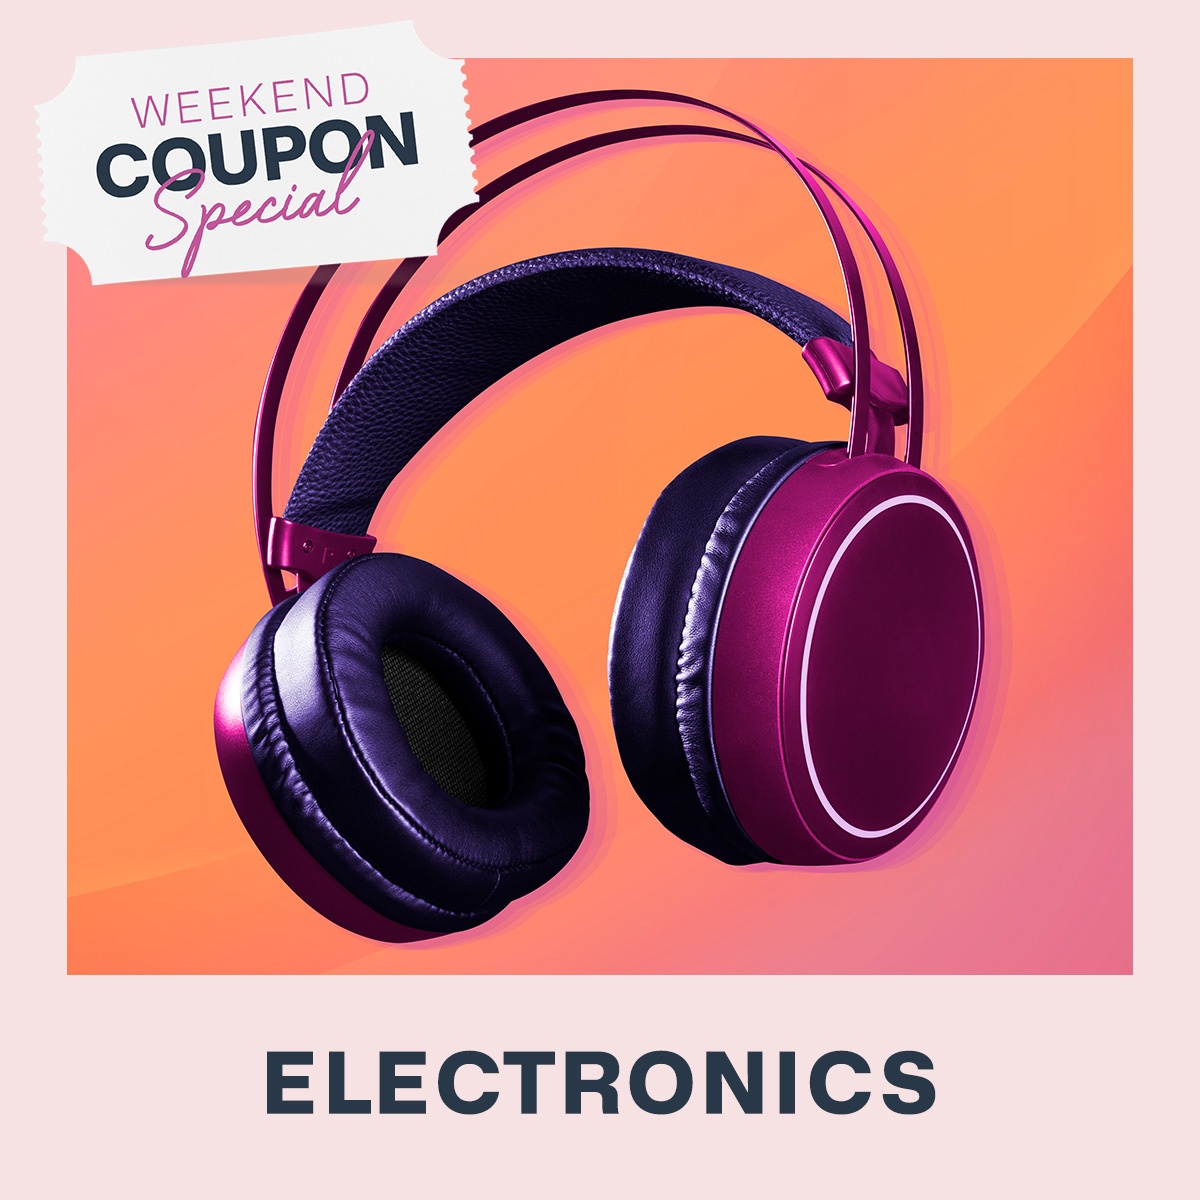 Weekend Electronics Coupon Special